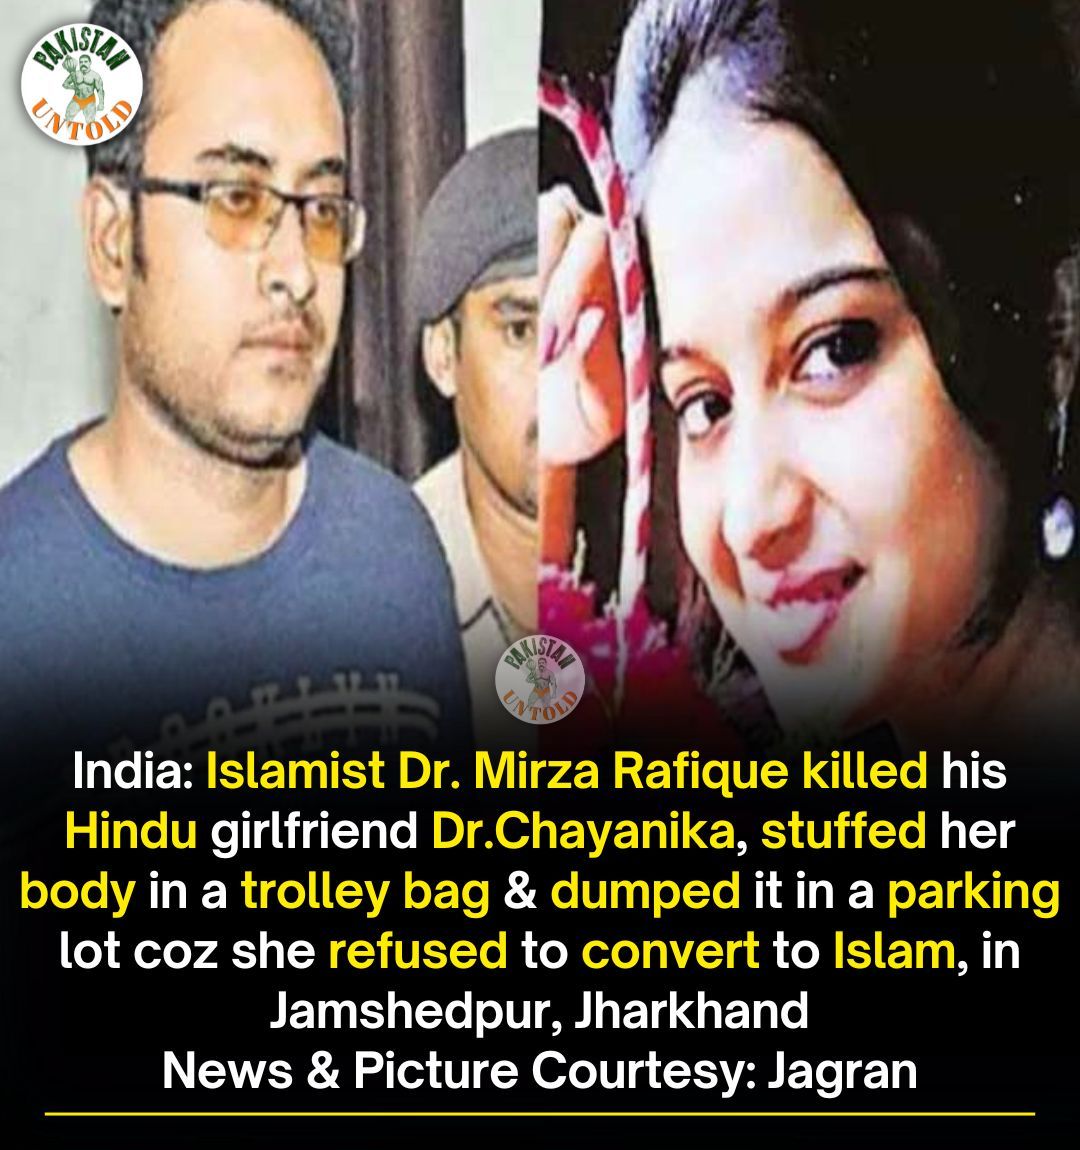 Chayanika loved Mirza coz her love was above religion. Chayanika is now dead.